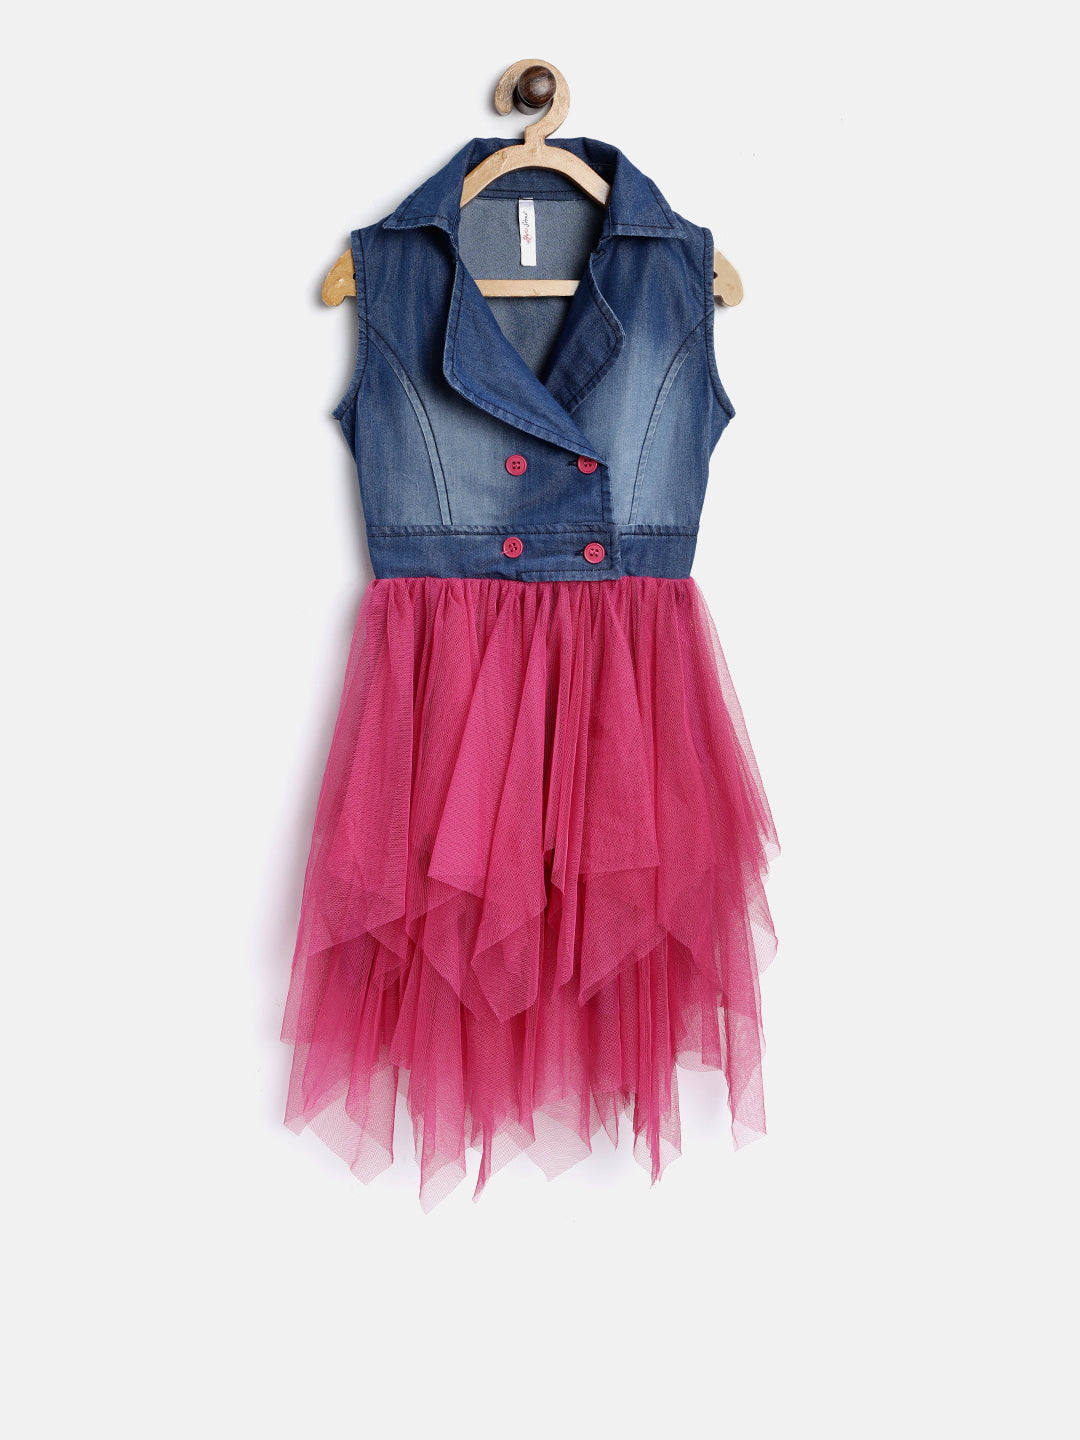 Gilr's Denim Dress With Bow And White Lace - StyleStone Kid